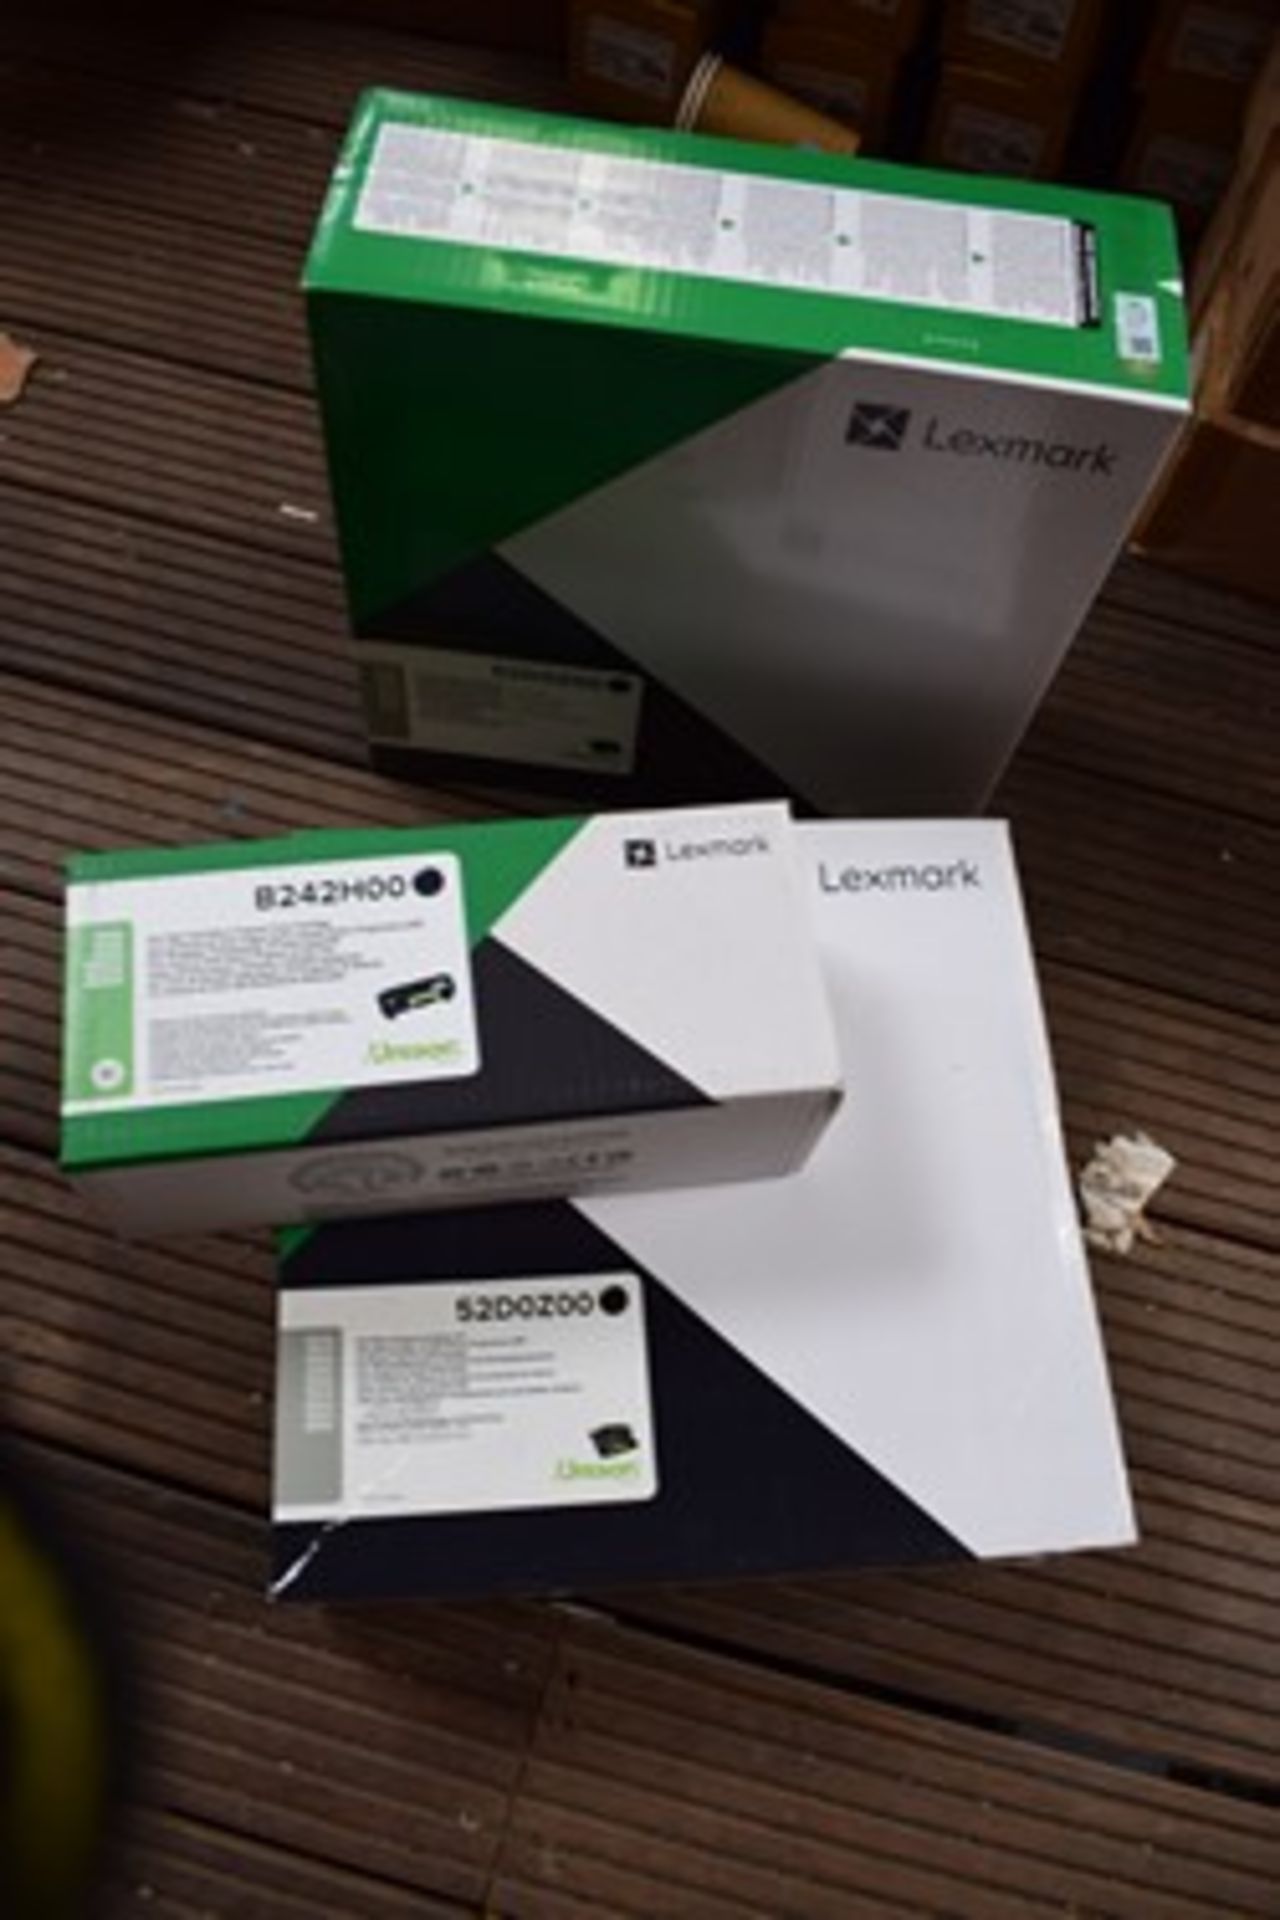 2 x Lexmark 52D0Zoo imaging units and 1 x Lexmark B242H00 high yield toner cartridge - Sealed new in - Image 2 of 2